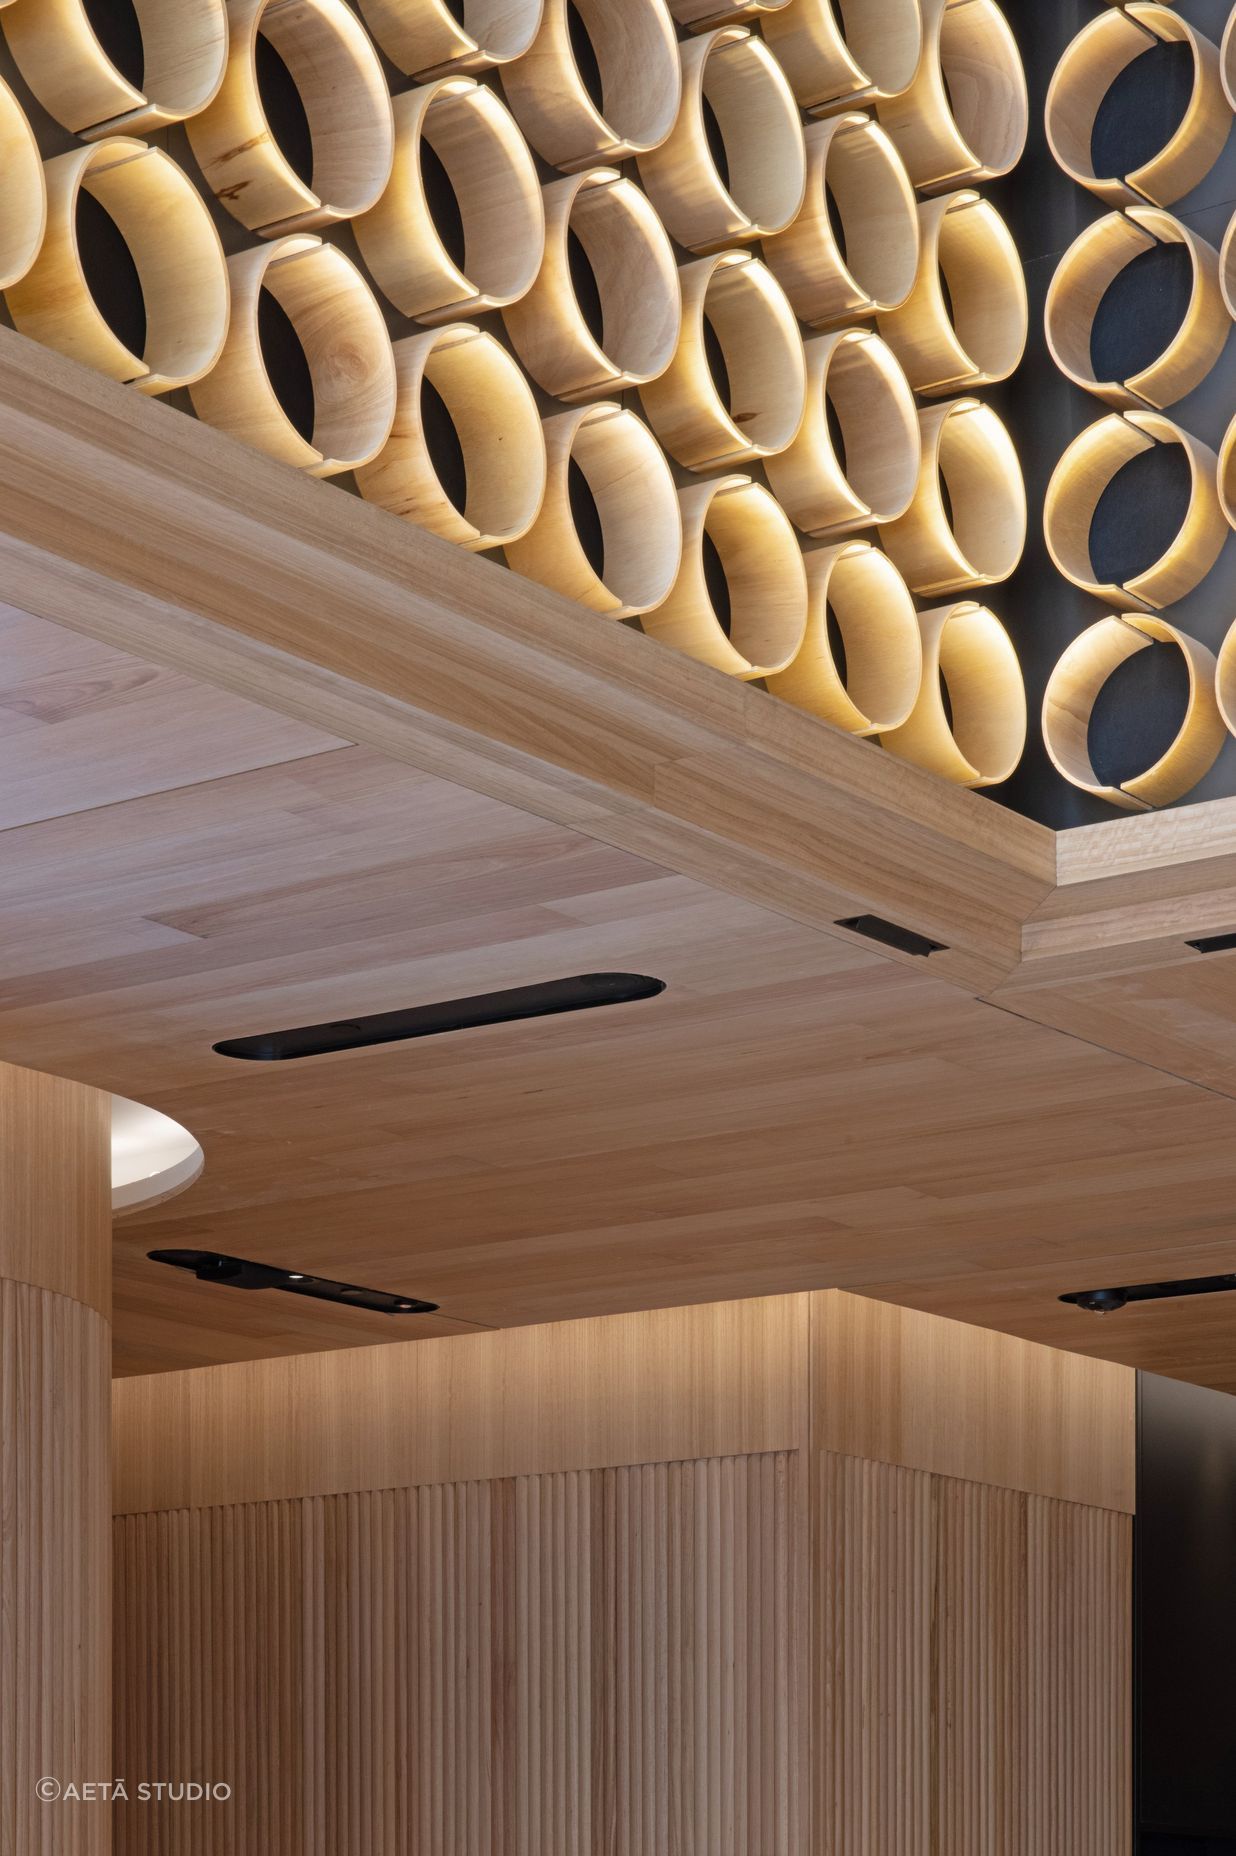 The design Integrated sustainable materials like timber.